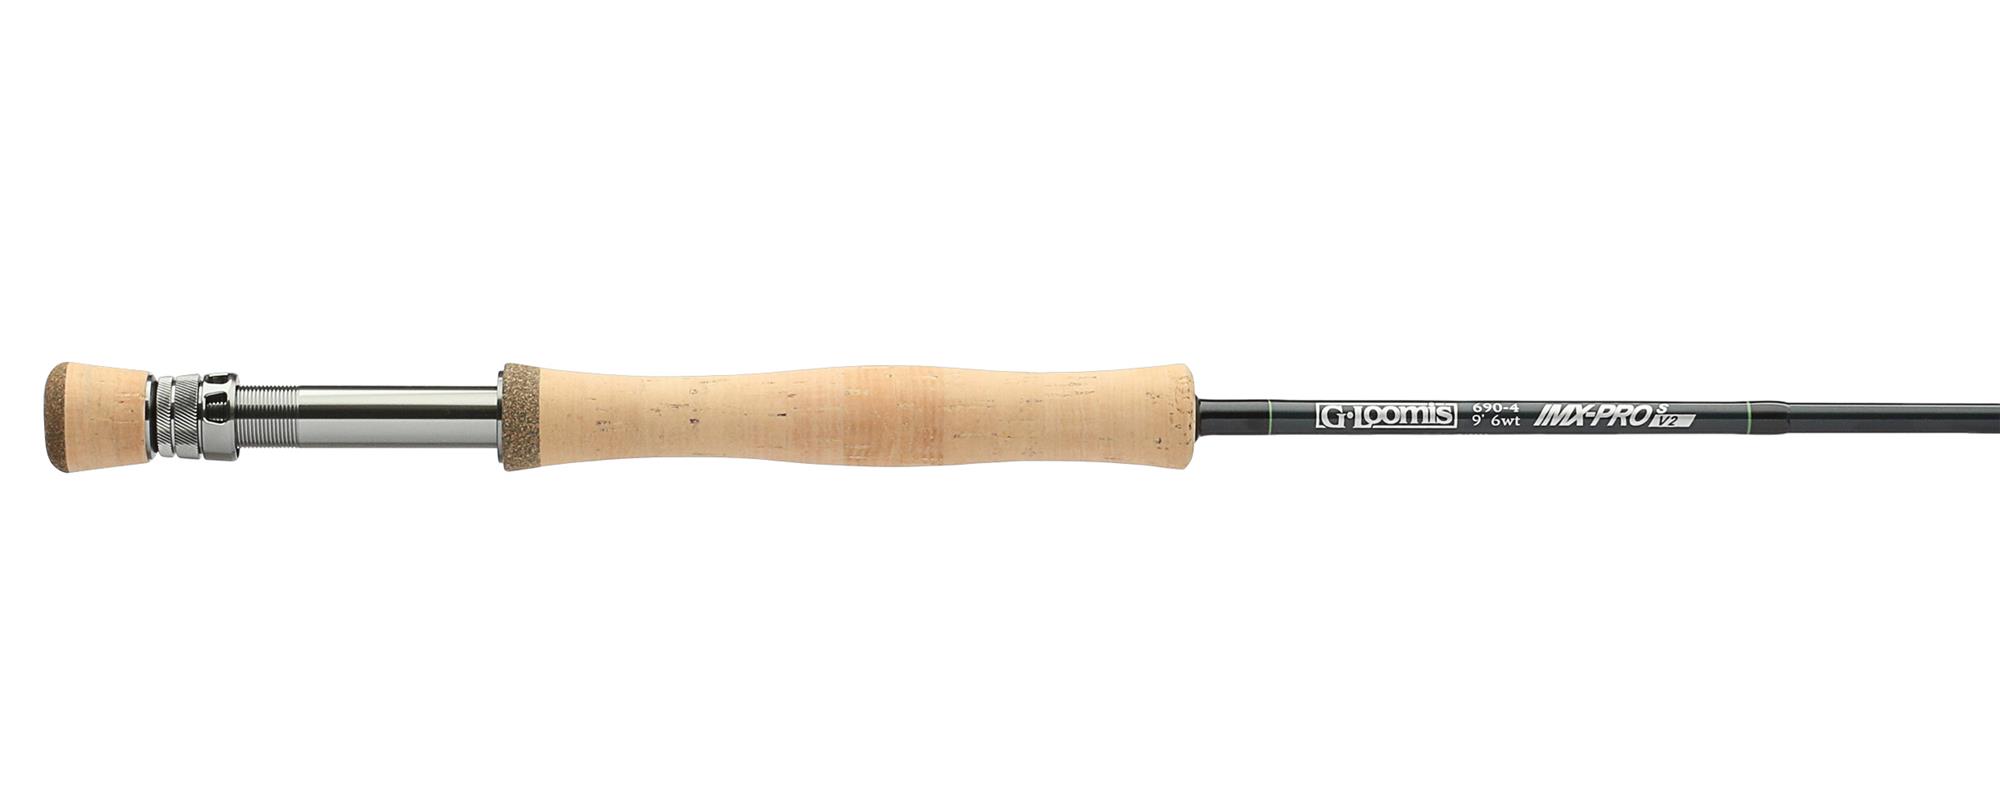 G. Loomis IMX-Pro V2S Saltwater Fly Rod, engineered for unmatched strength and durability in saltwater conditions.